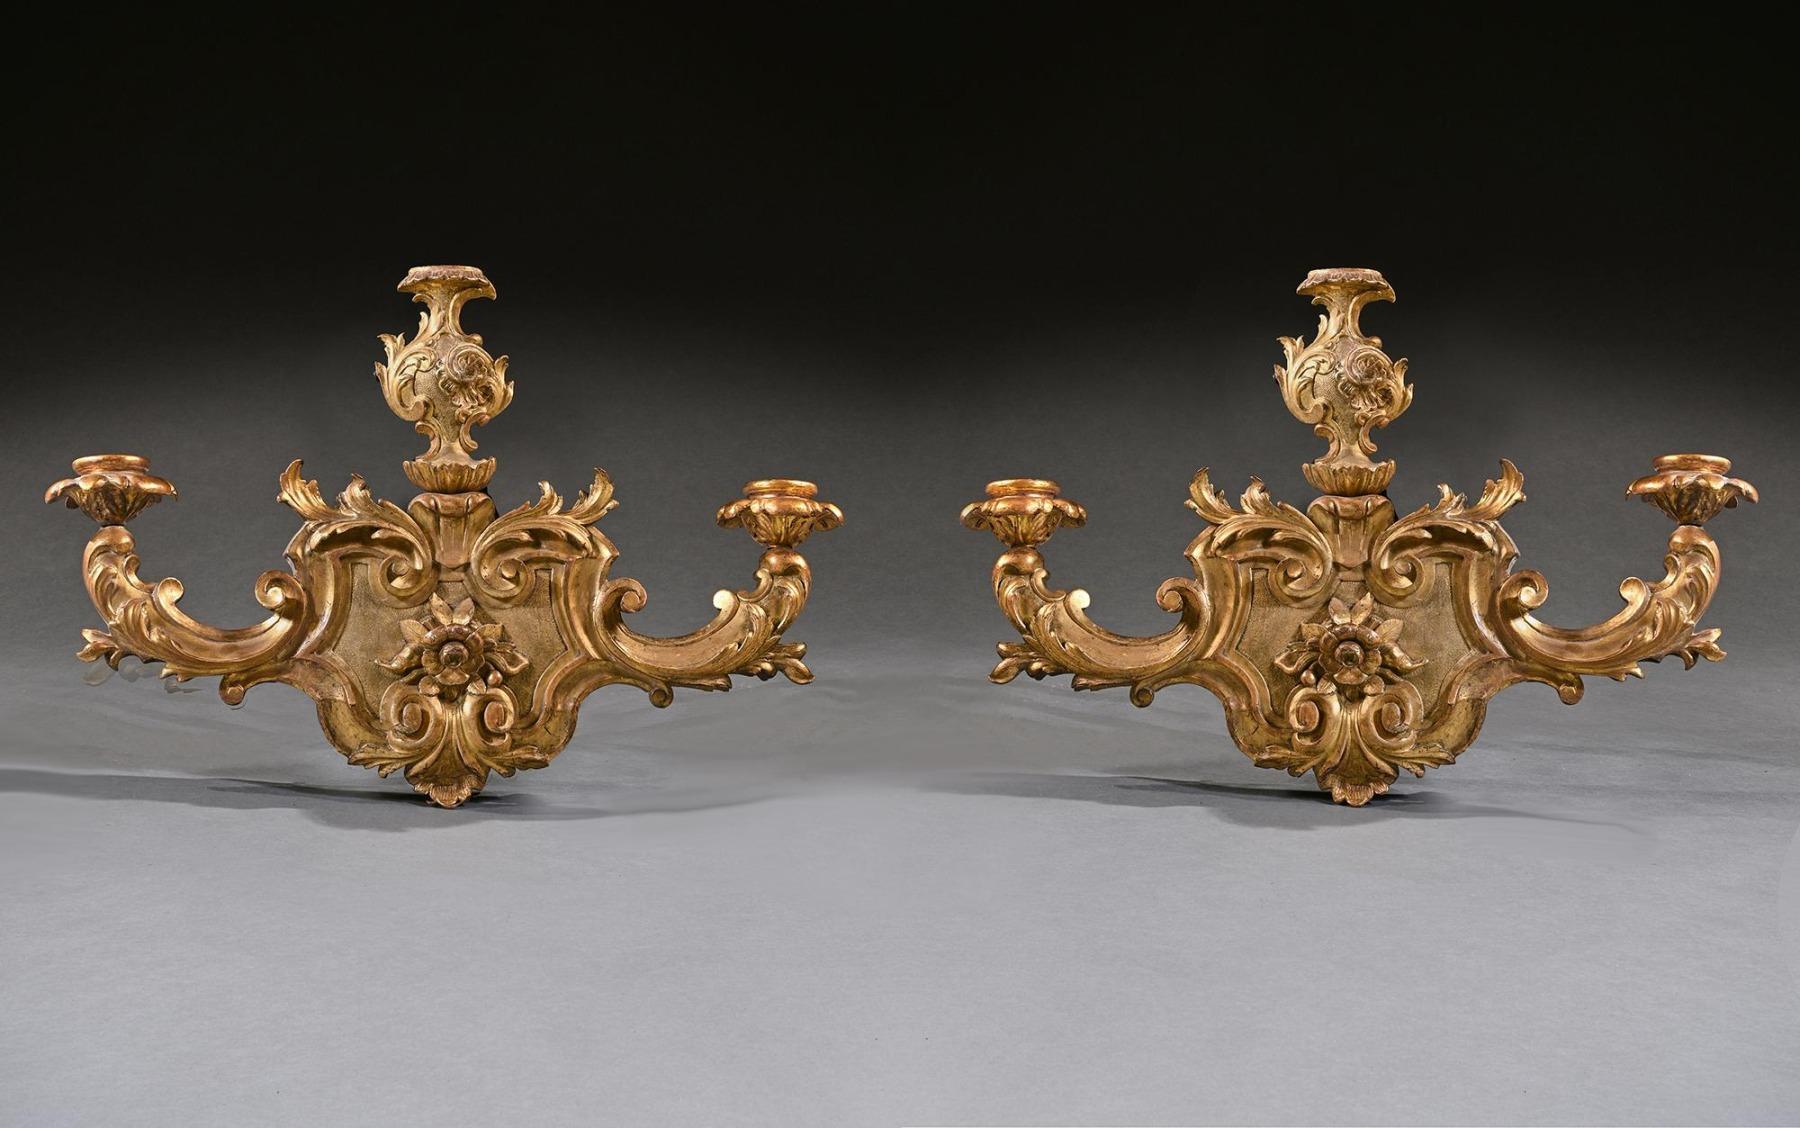 Pair of 18th Century Venetian Giltwood Wall Sconces For Sale 3